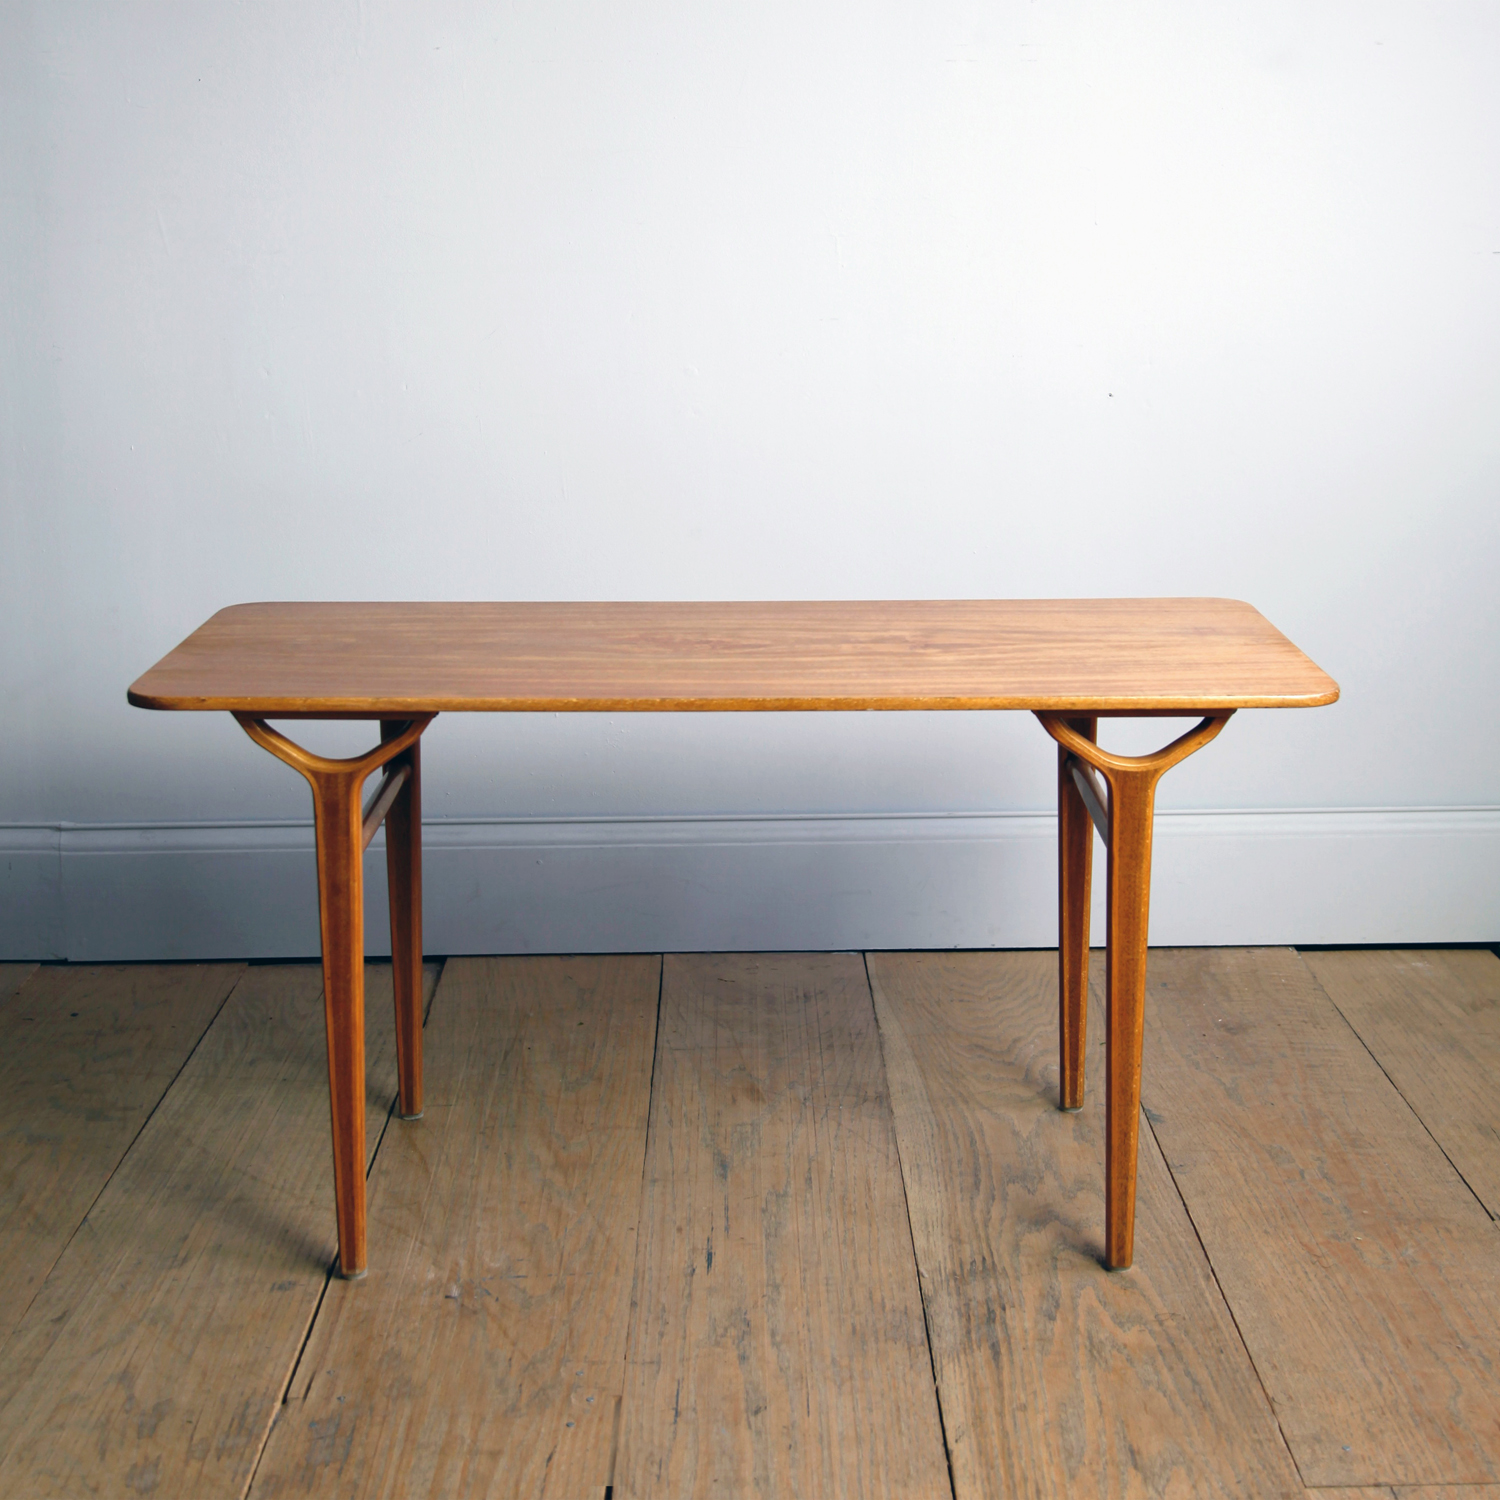 Peter Hvidt and Orla Mølgaard-Nielson "Ax" Table, Model 695